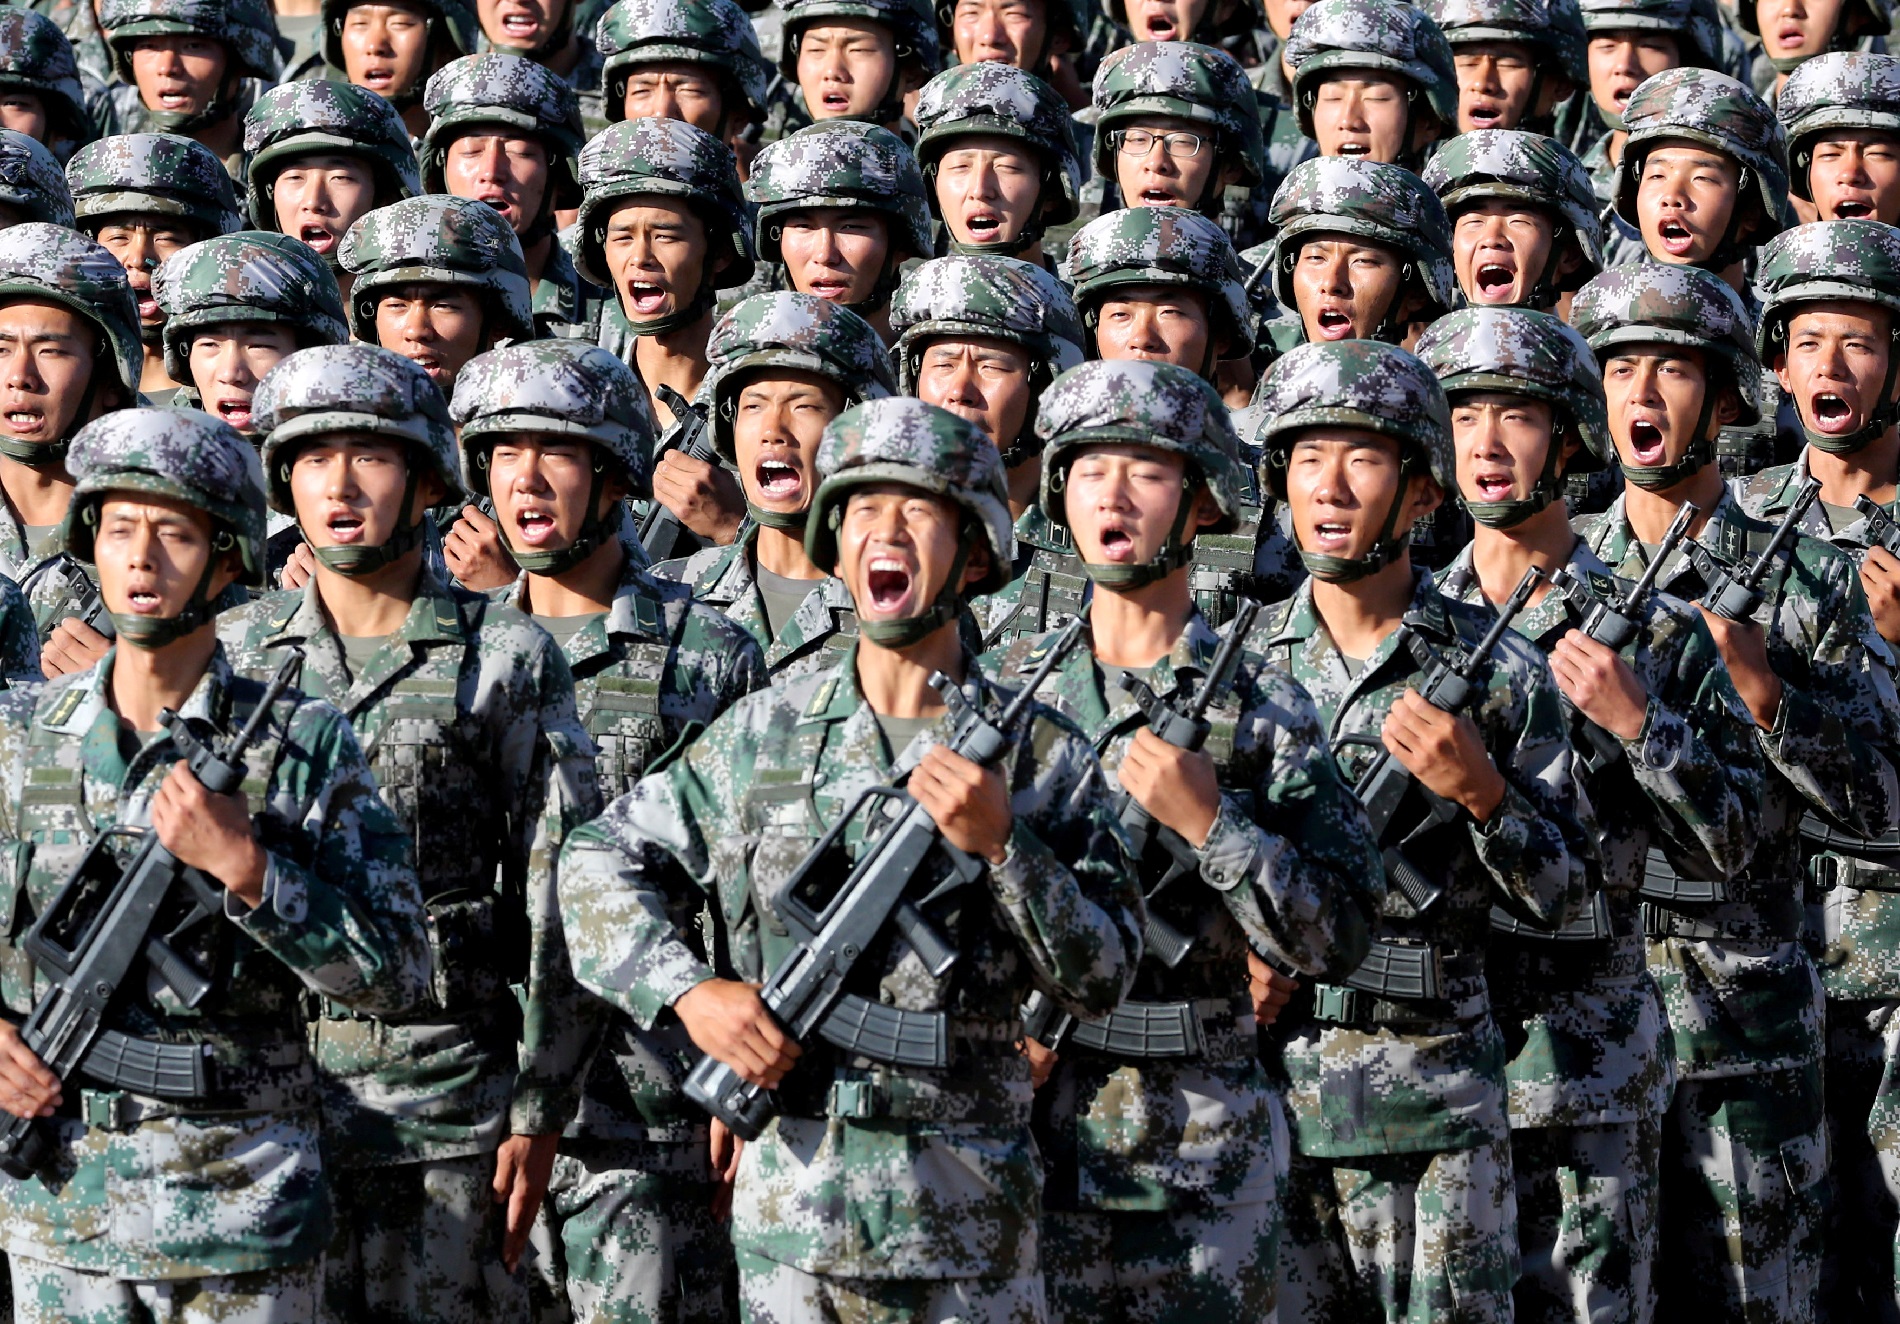 WATCH China's Military Just Released a New Video Showing Off Its Most